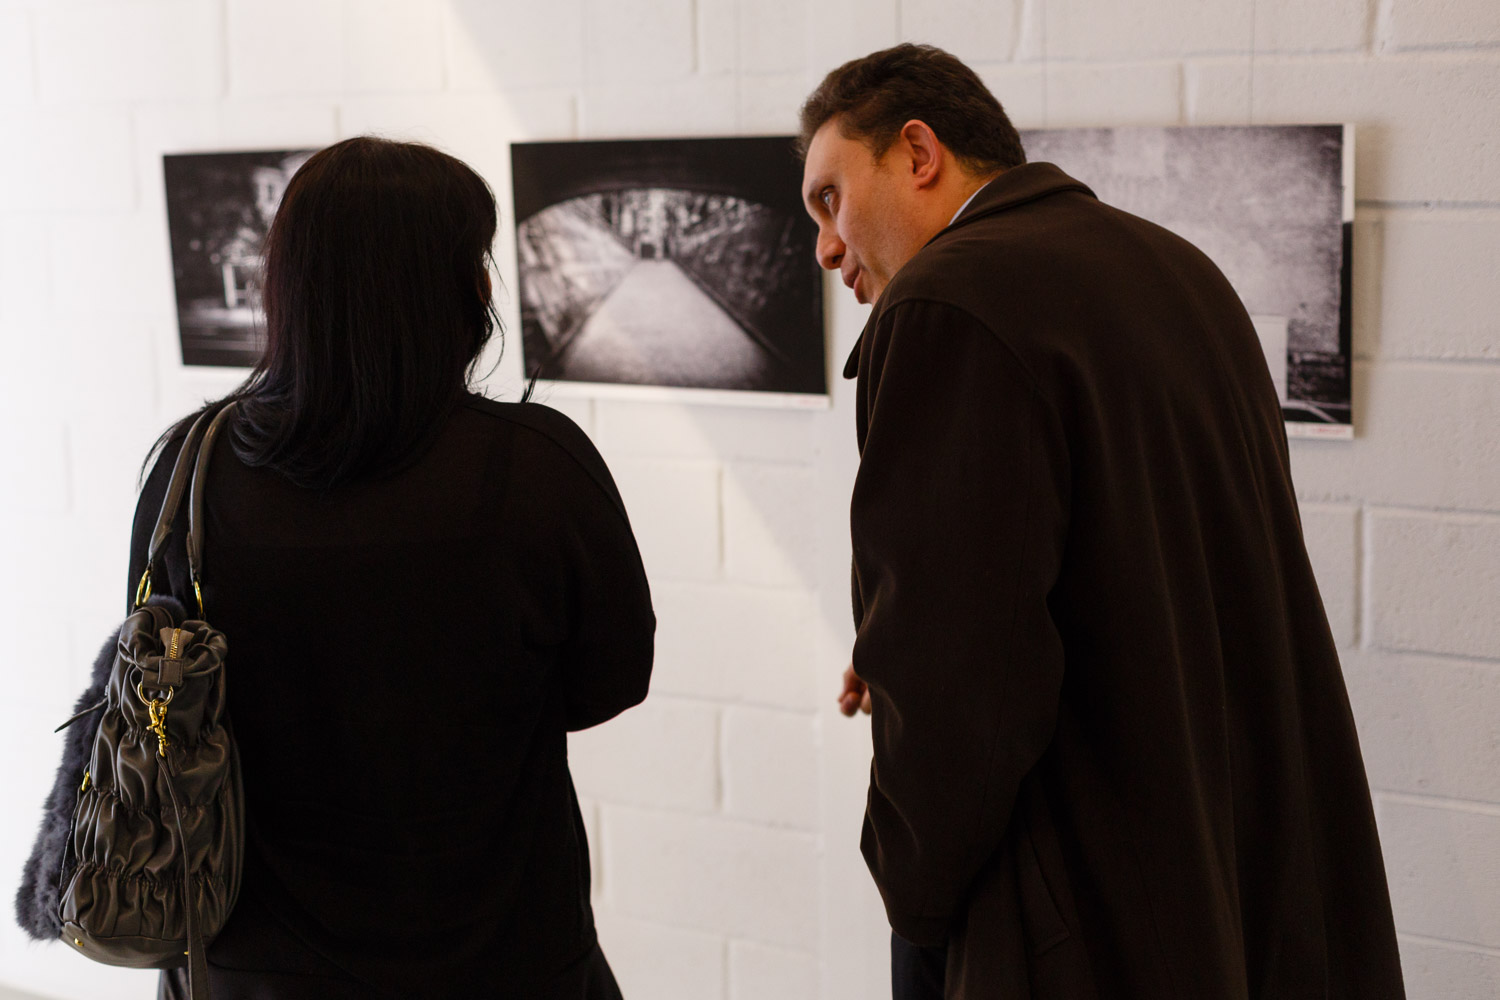 Collective exhibition by Street Photography Luxembourg at Lecuit Howald